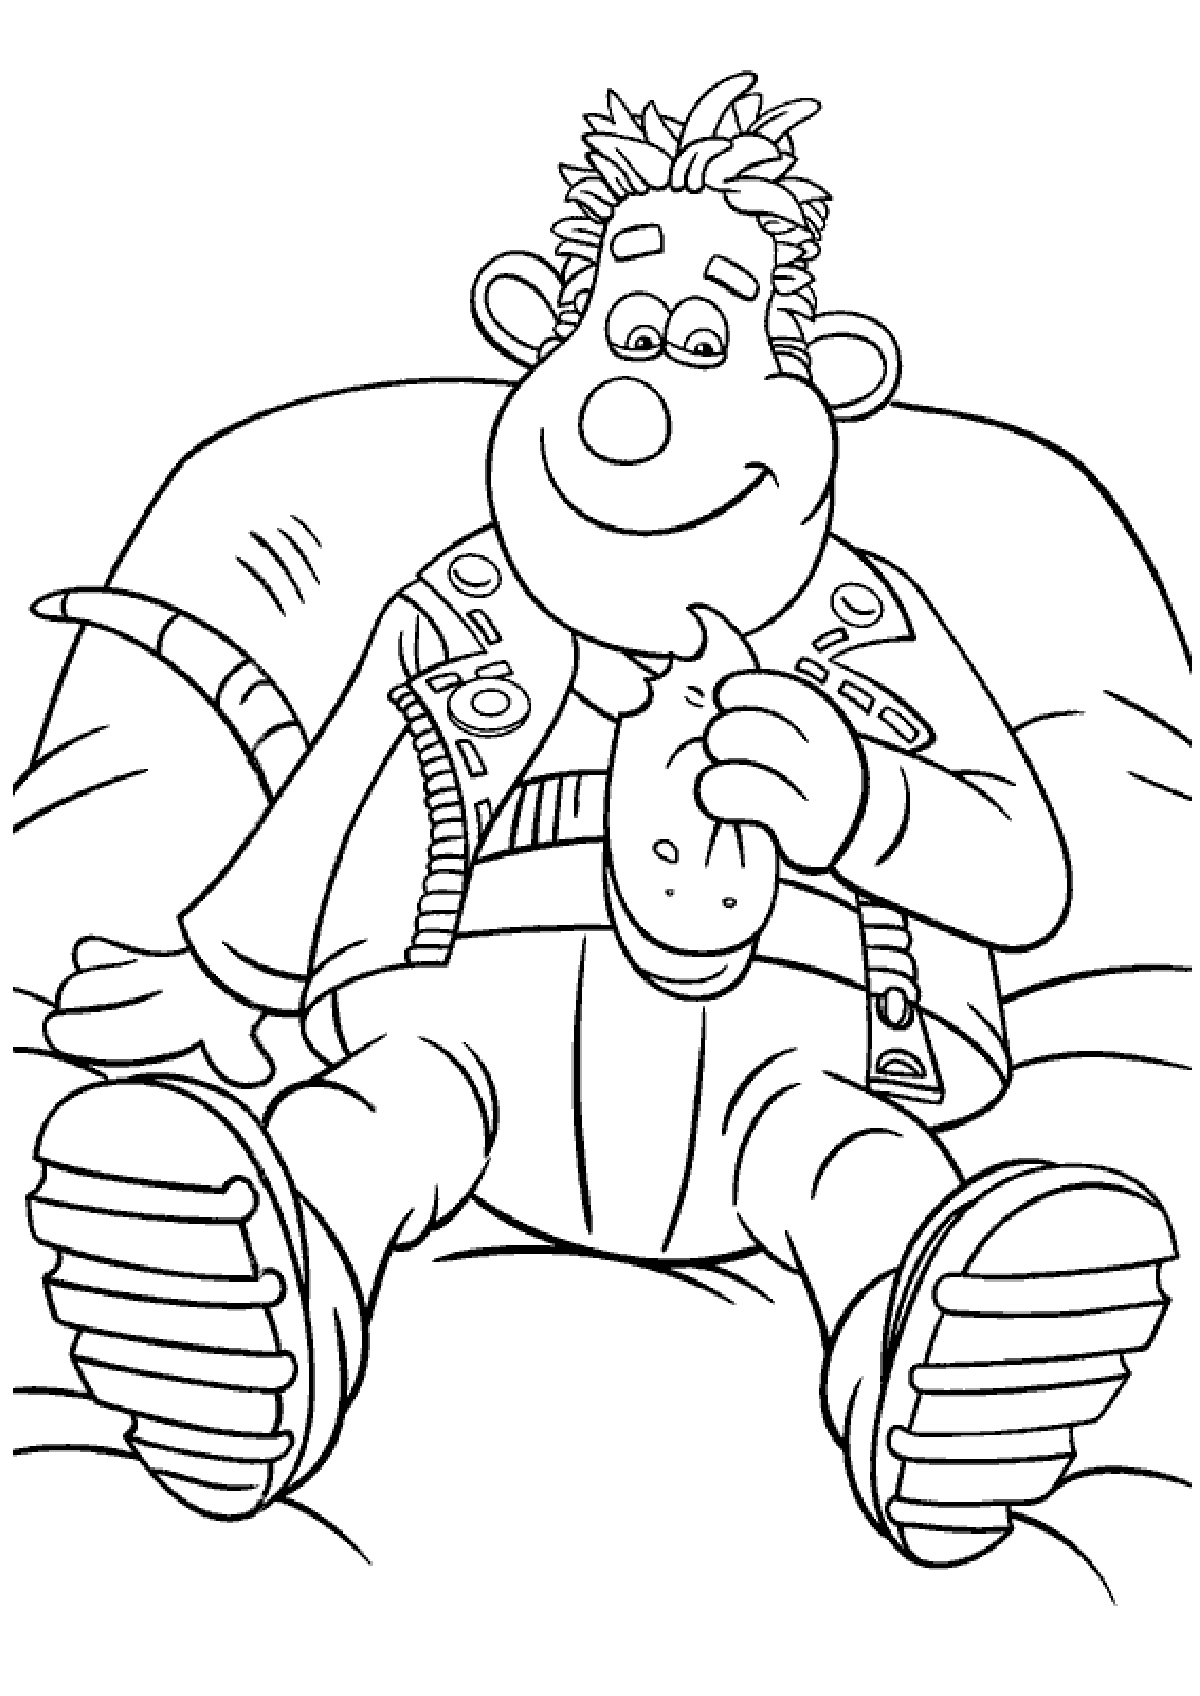 Flushed Away coloring pages to download and print for free